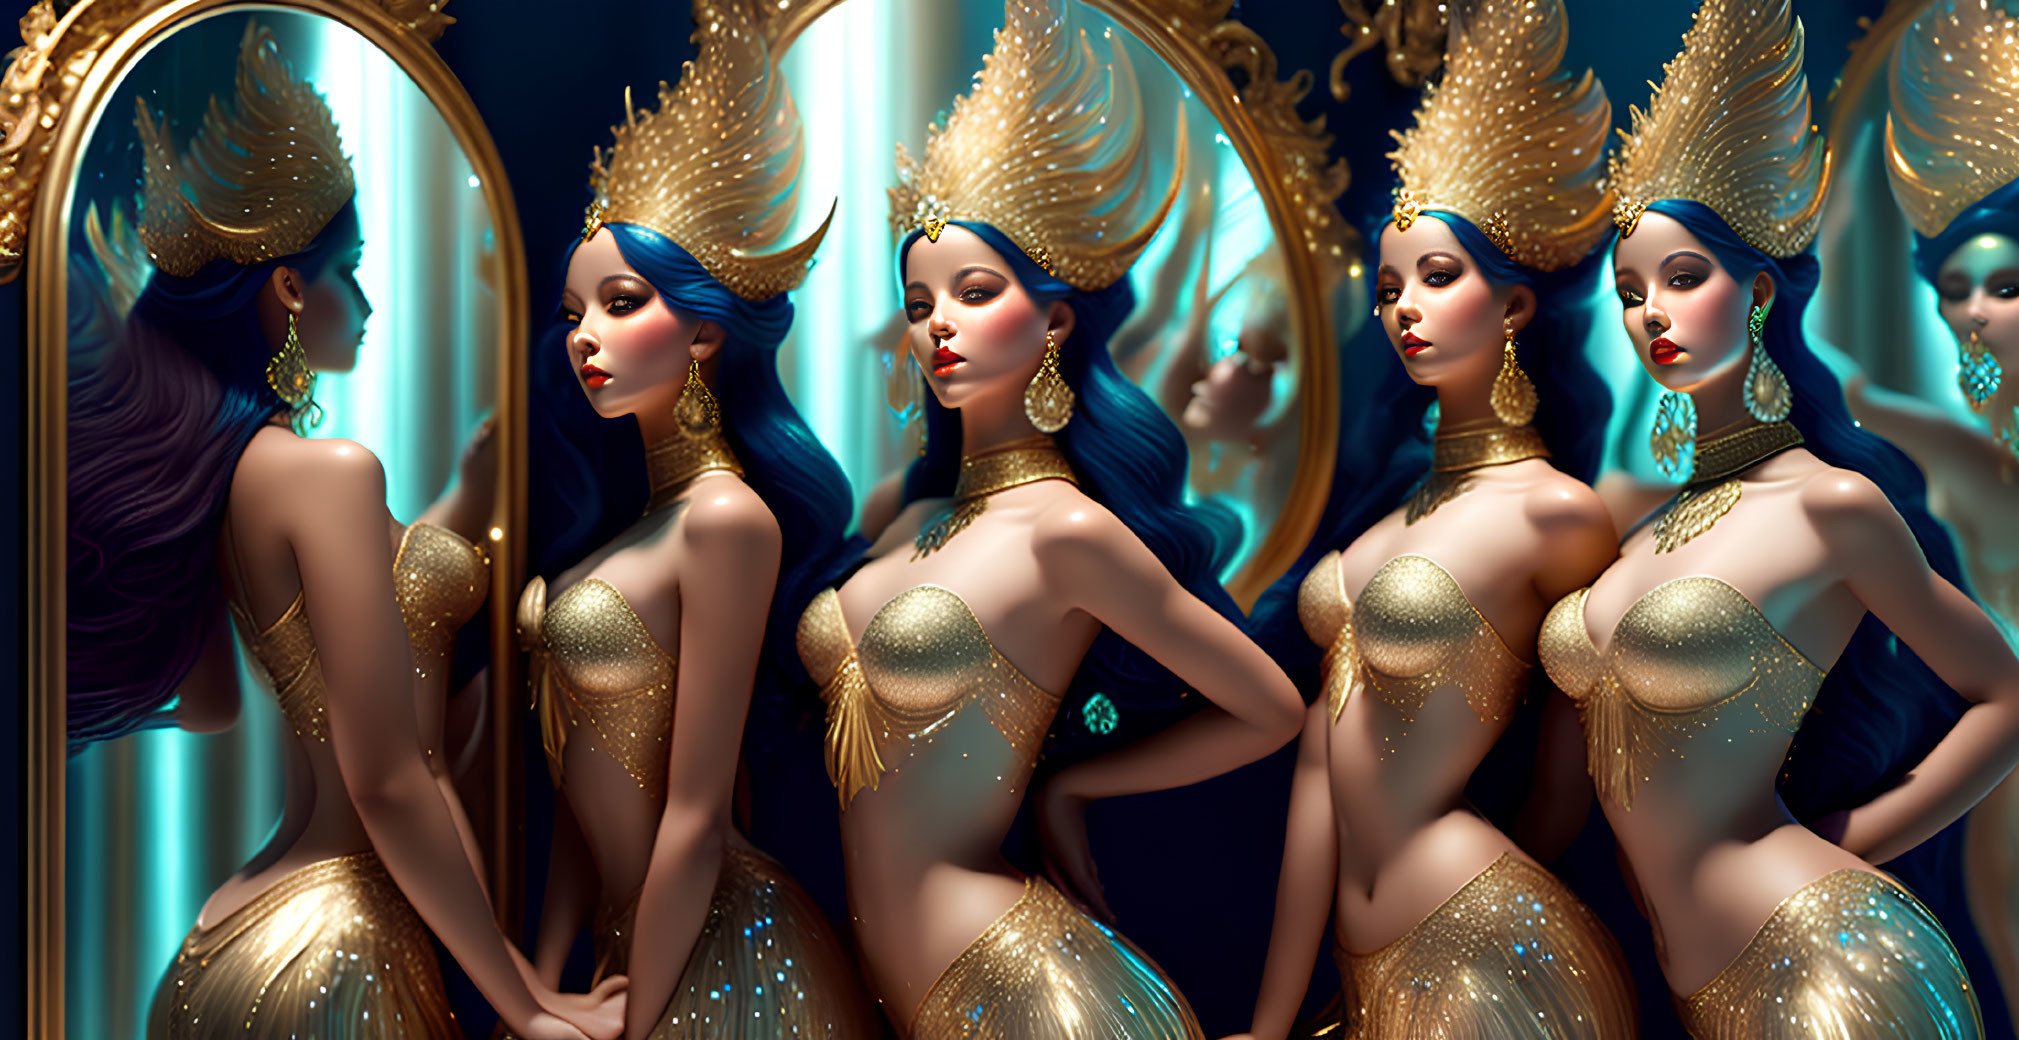 Identical glamorous women with blue hair and golden attire mirrored in luxurious symmetry